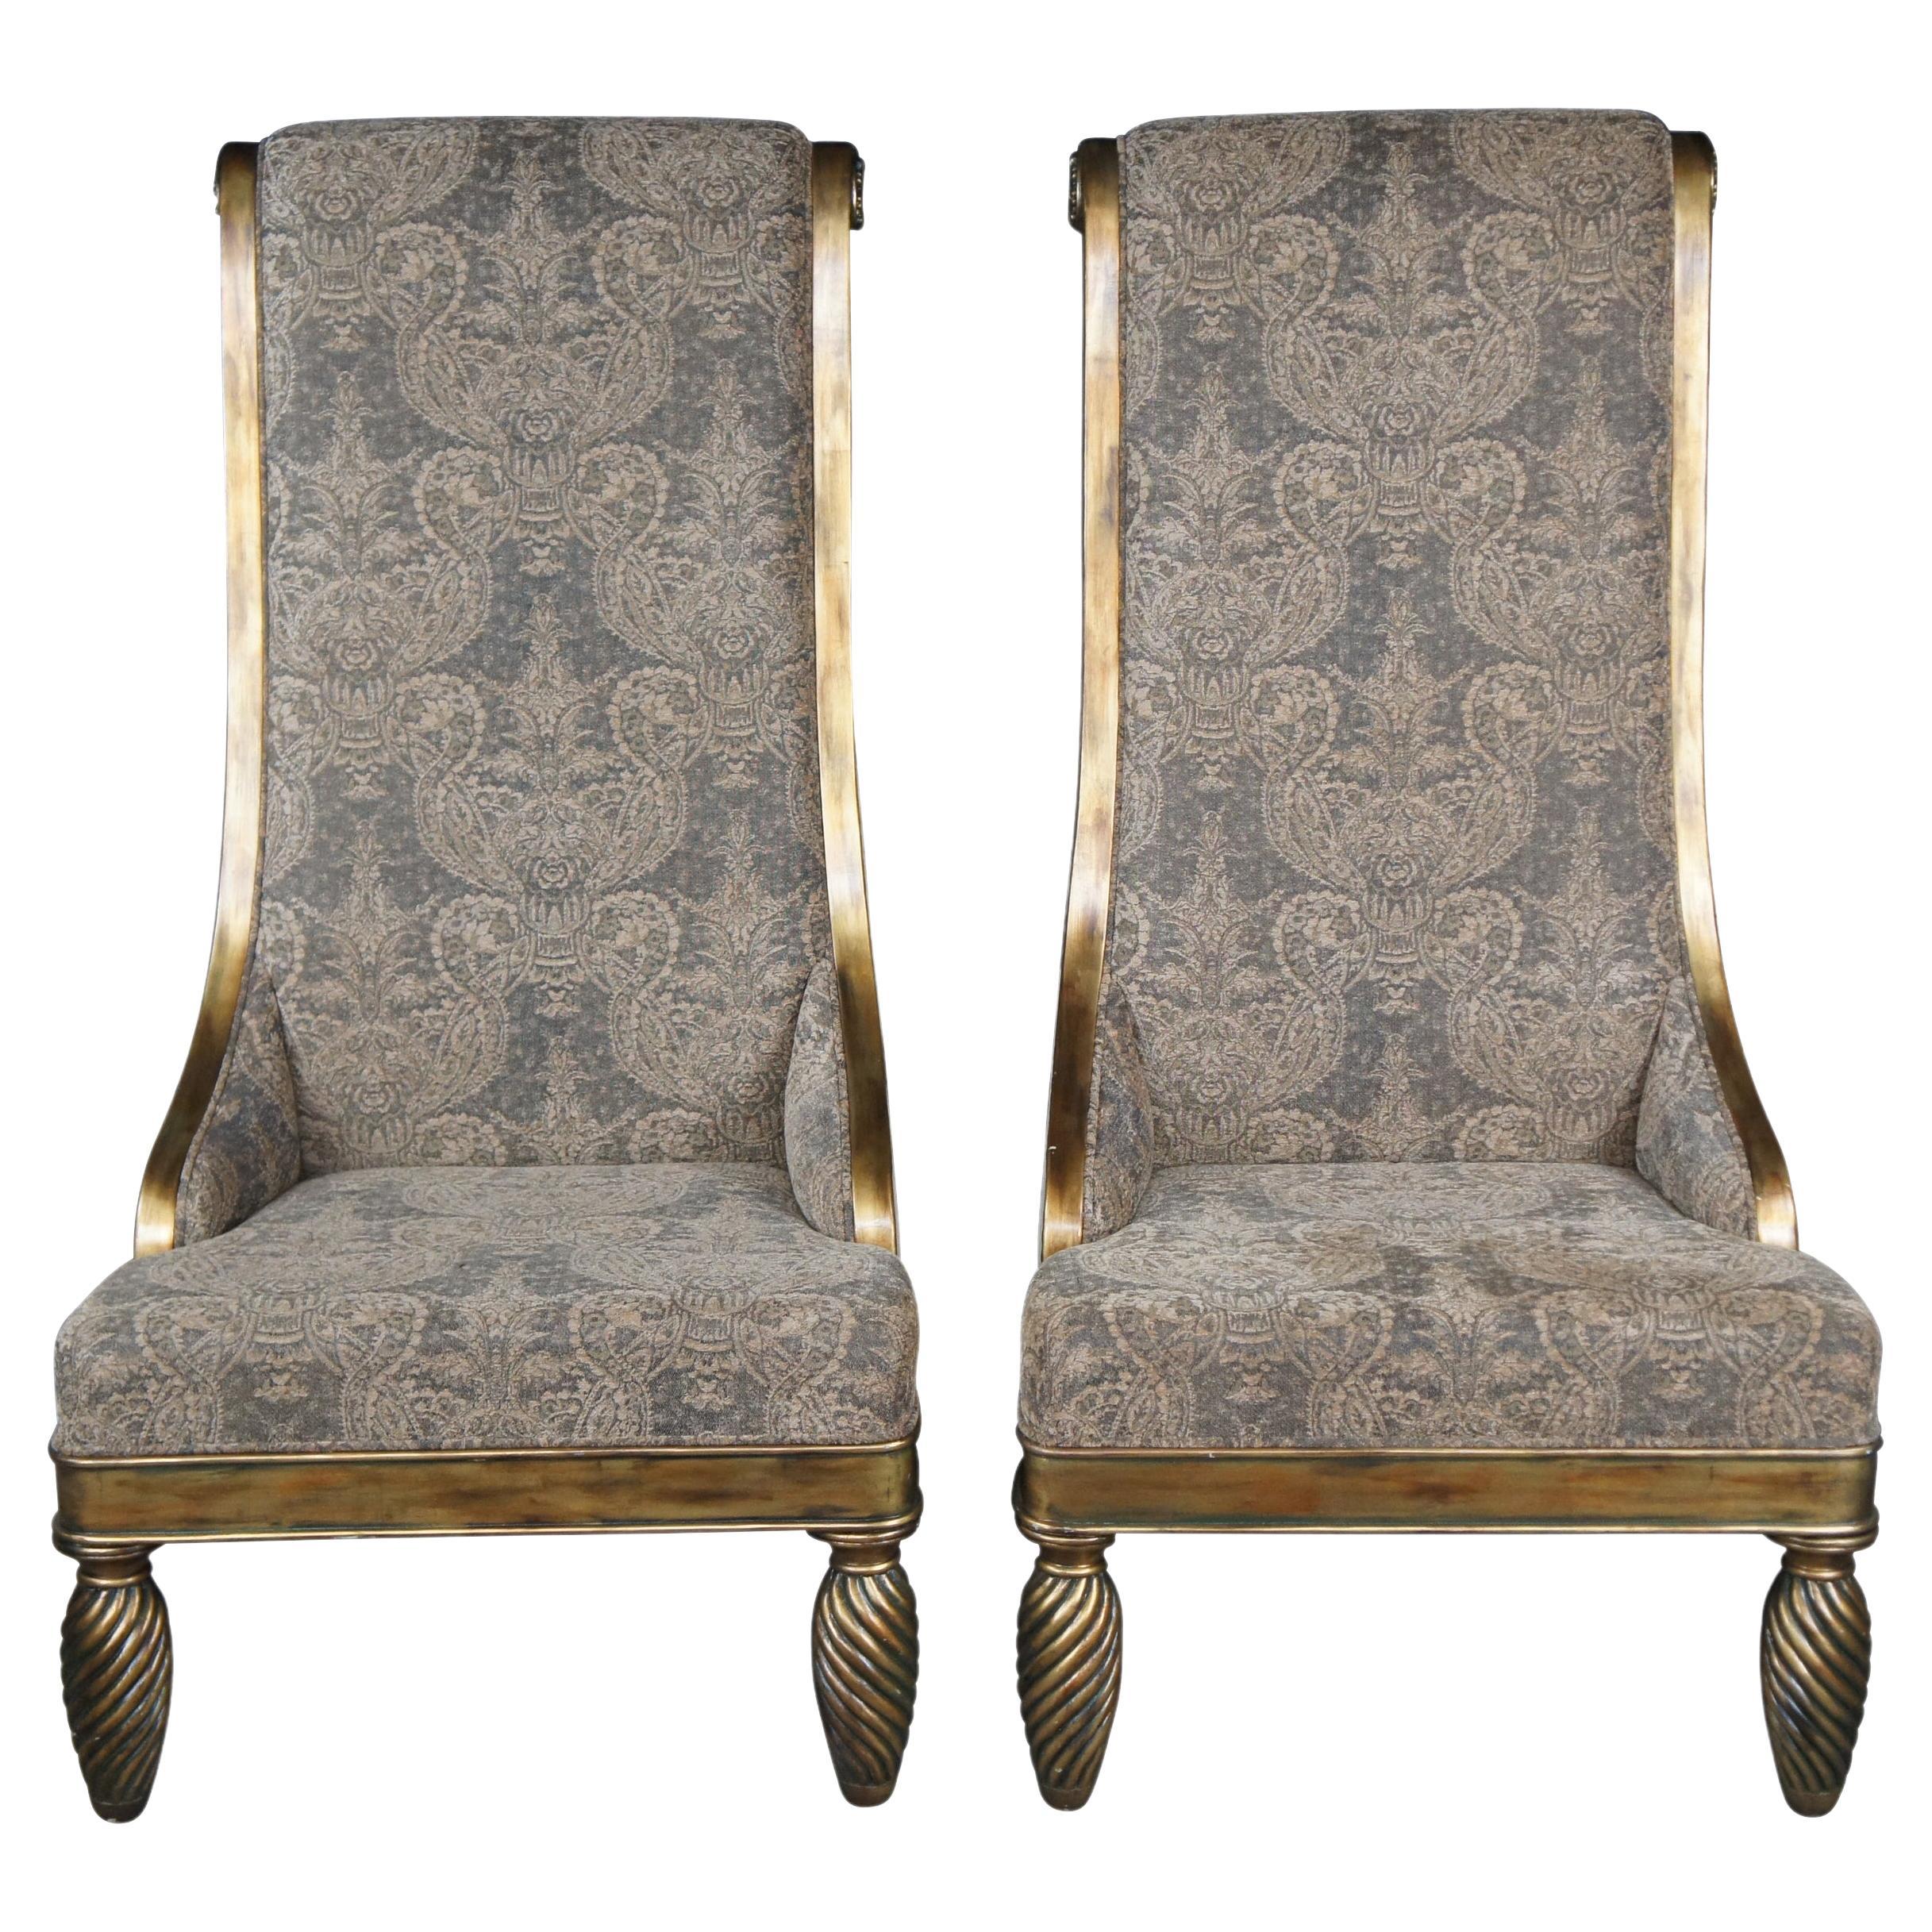 2 French Hollywood Regency High Back Oversized Throne Club Lounge Chairs 60"